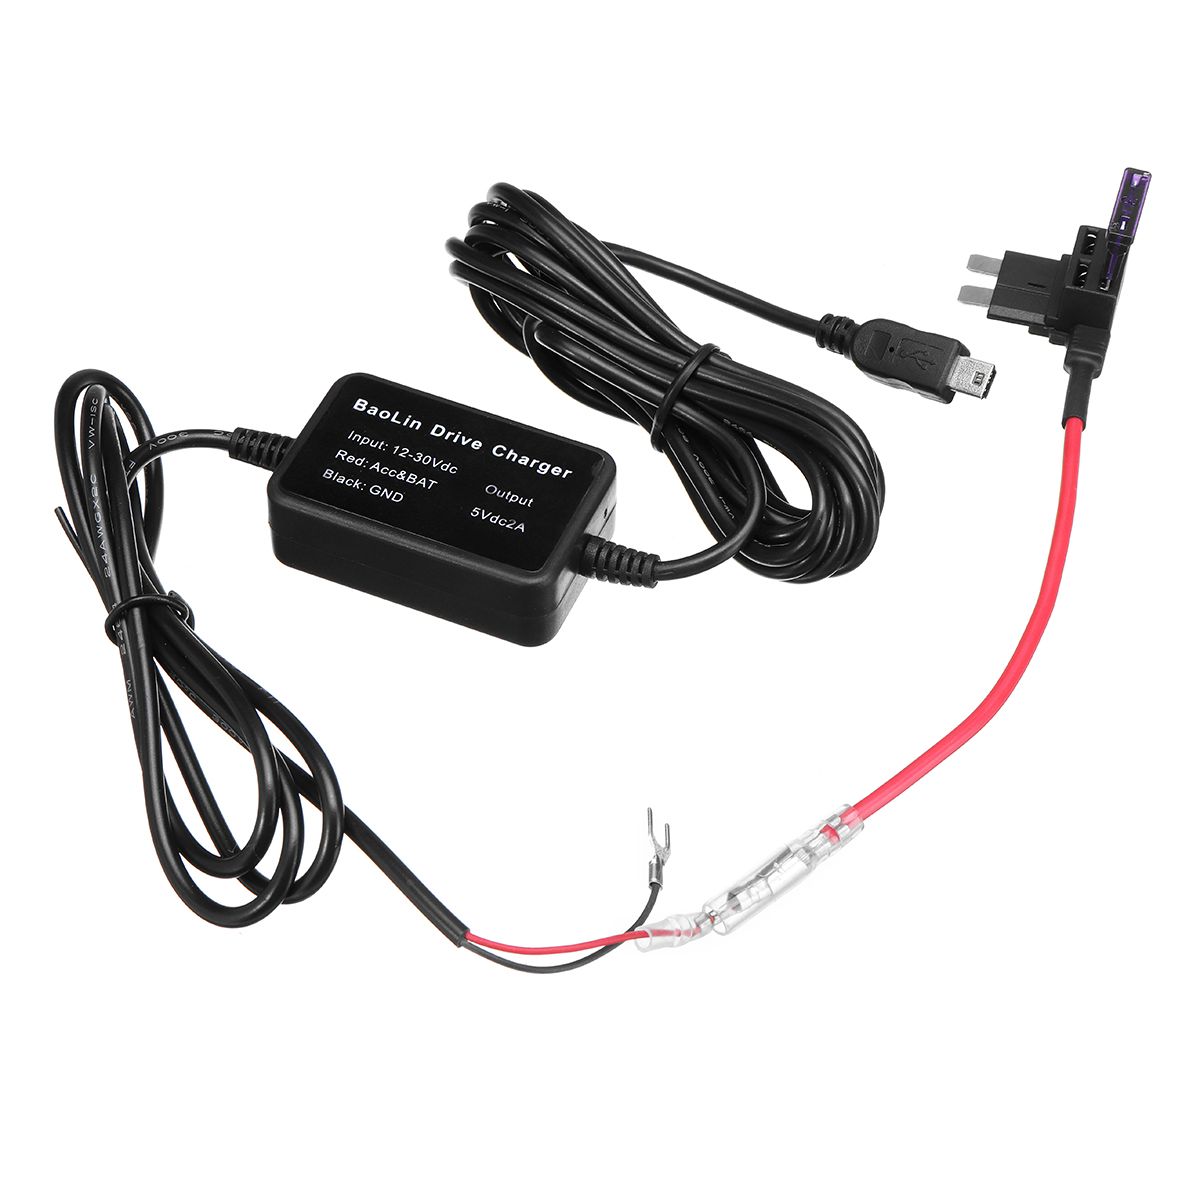 Car-Hard-Wire-Dash-Car-Cam-Electric-Appliance--Recorder-Buck-Line-12V-to-30V-1414260